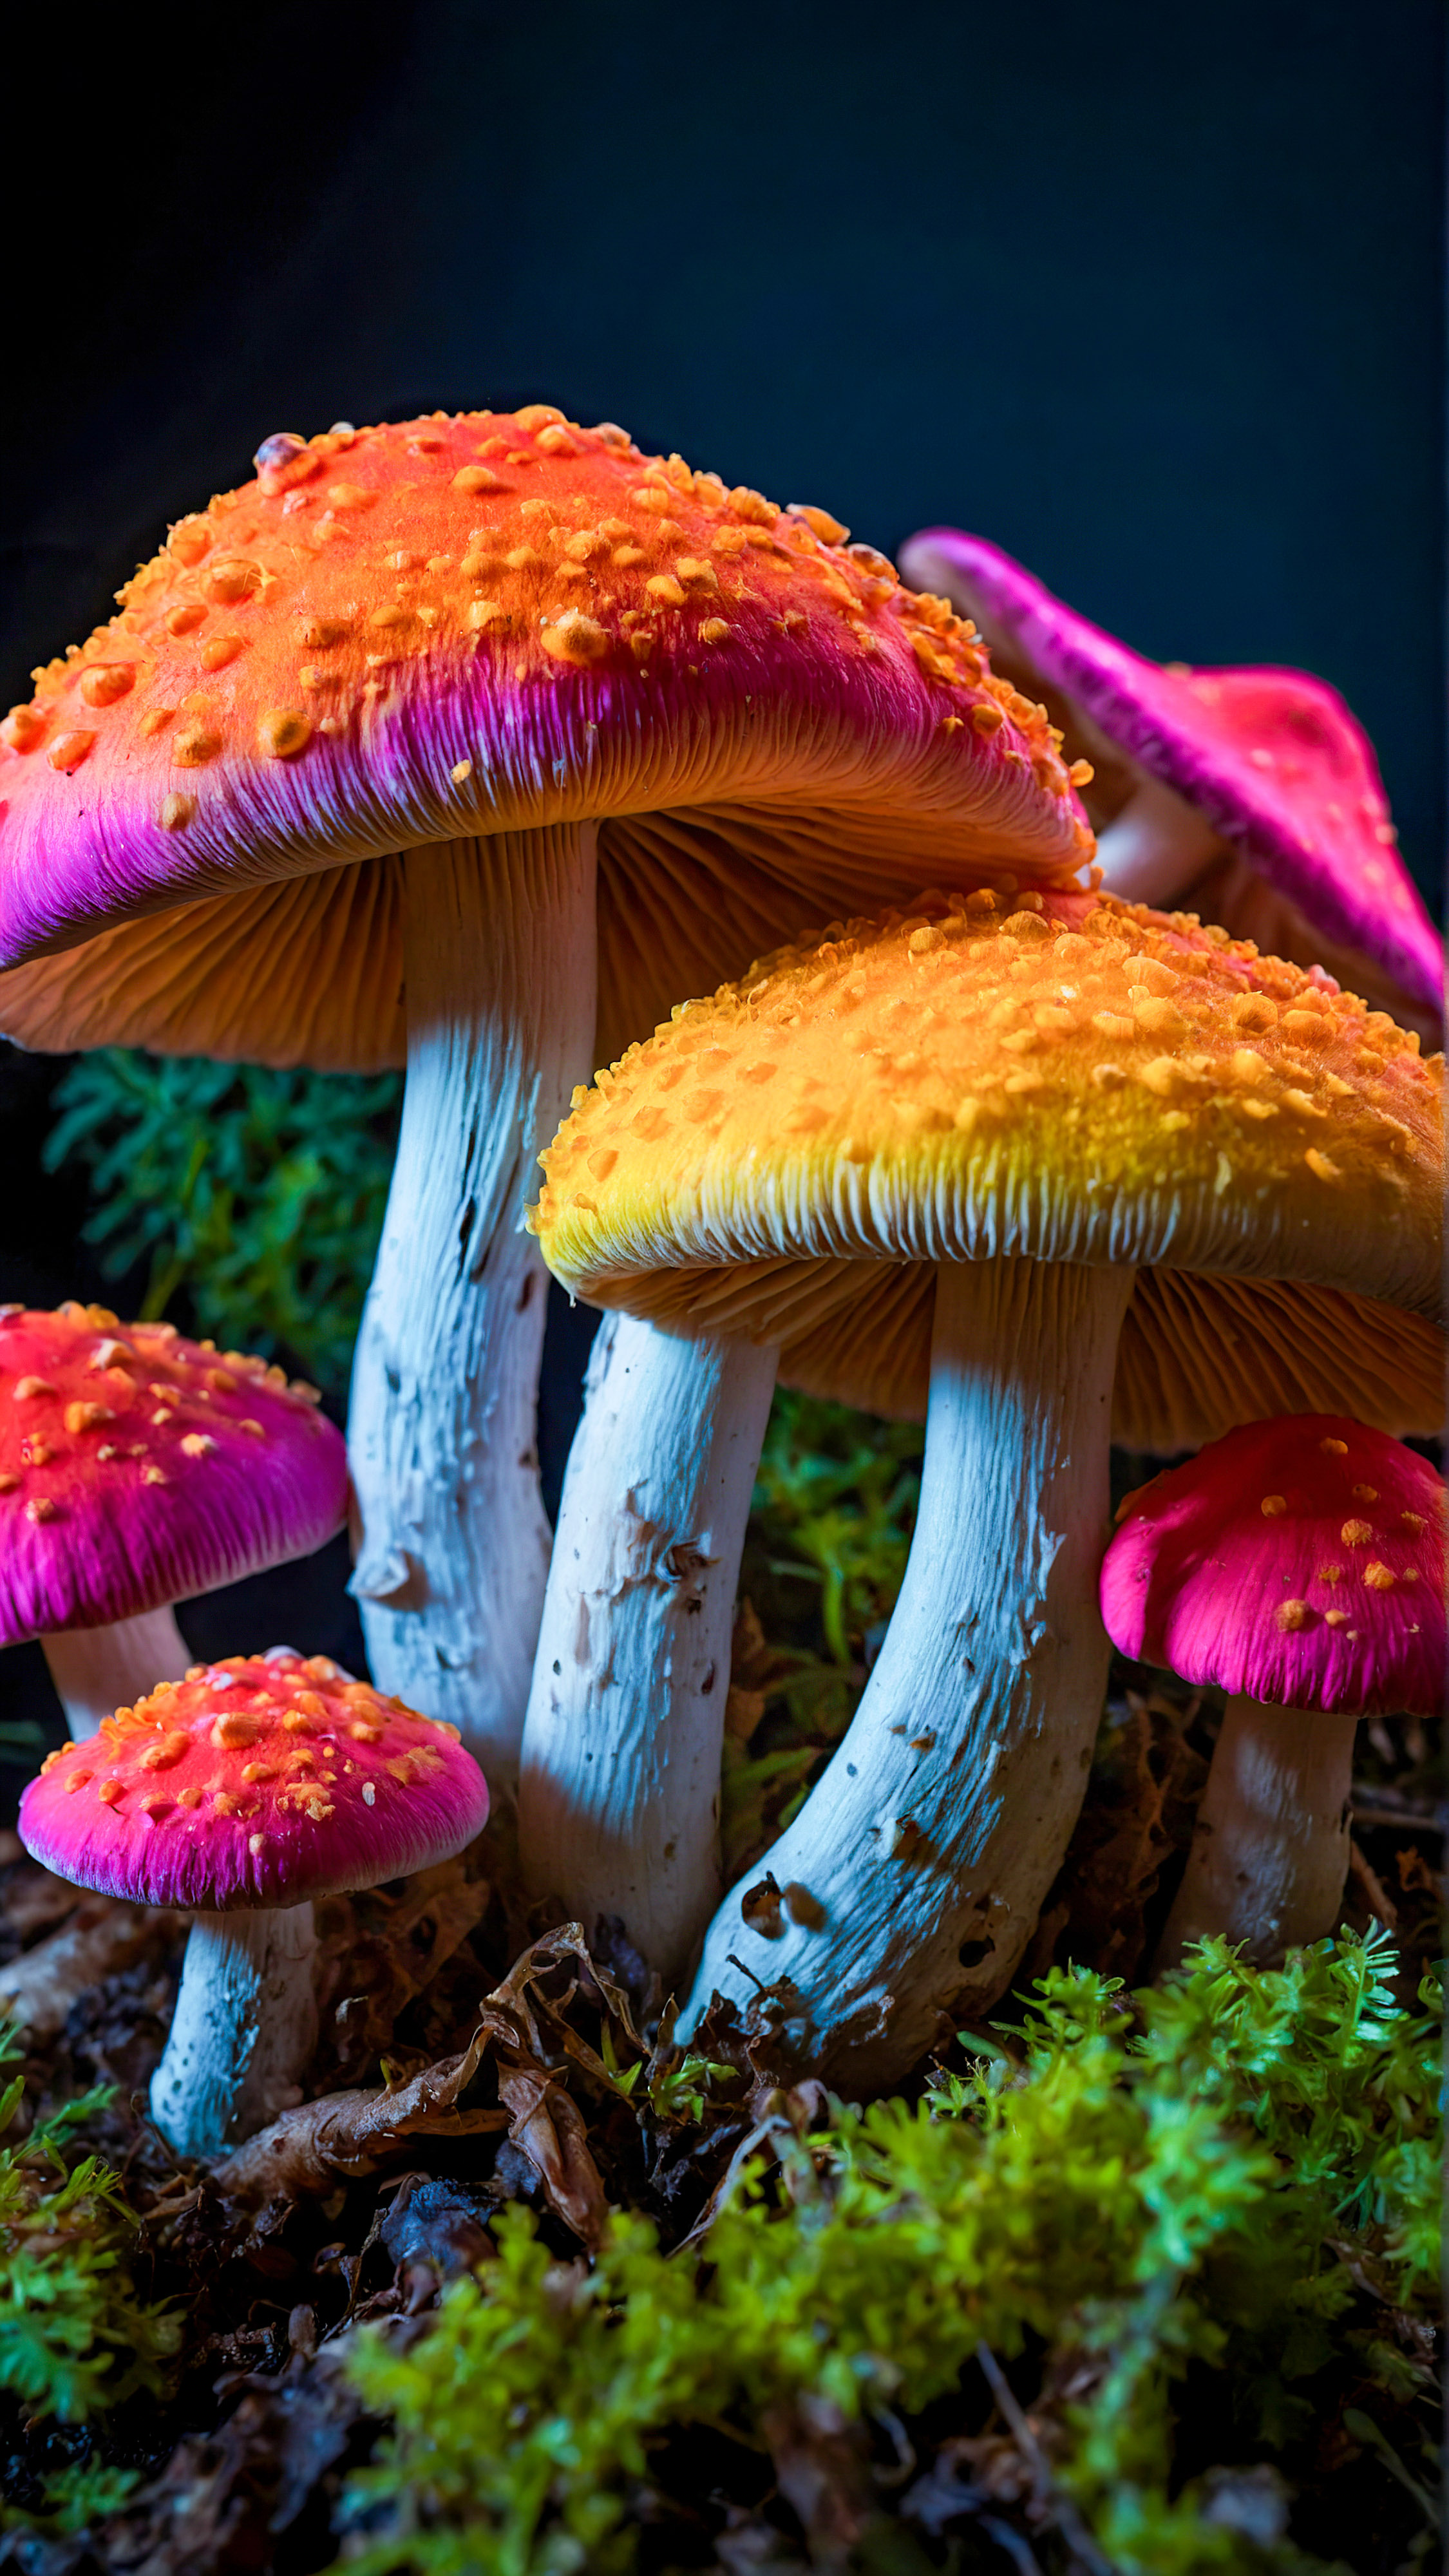 Get mesmerized with our cool 4K wallpapers for iPhone, featuring a group of vibrantly colored, neon-like mushrooms against a dark background, creating a visually striking and surreal effect.